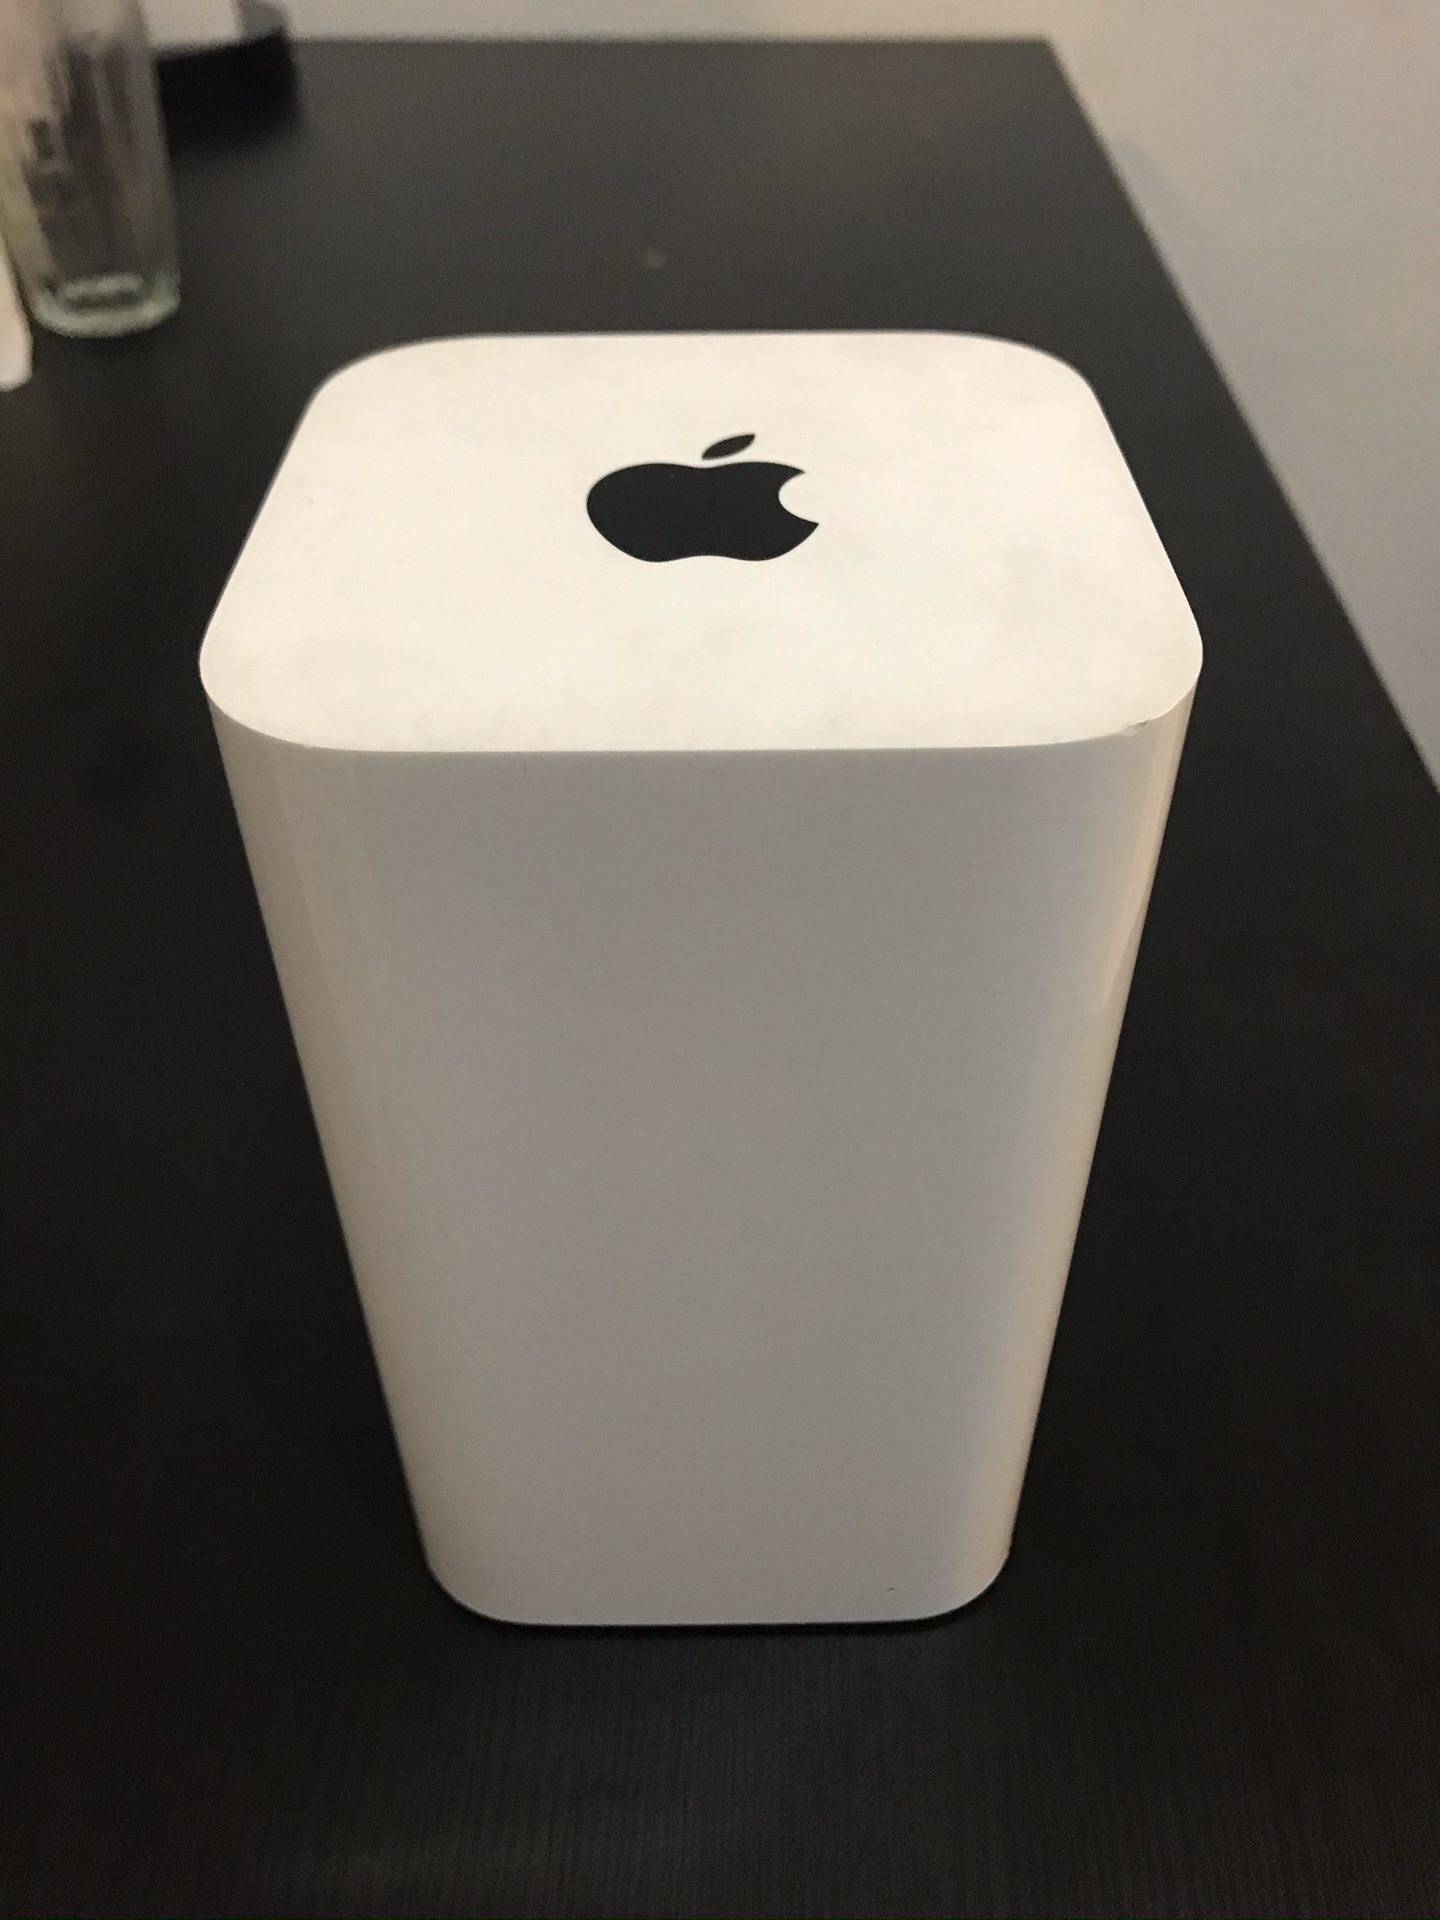 Apple AirPort Extreme Base Station 6th Gen Dual Band 802.11ac Wifi Router A1521